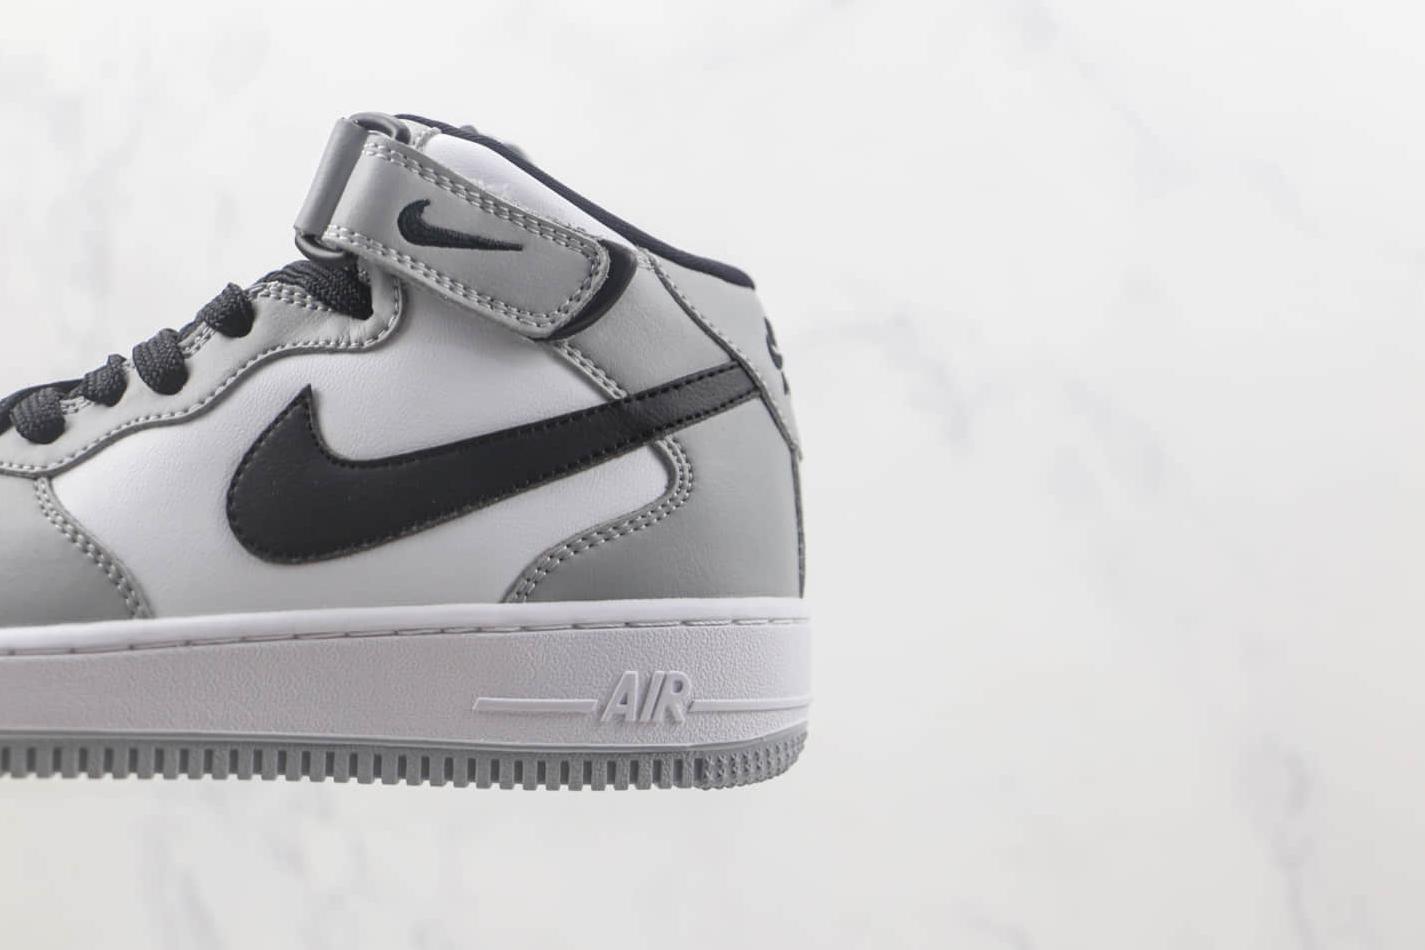 Nike Air Force 1 07 Mid Grey Black White HG1522-016 - Stylish and Versatile Sneakers for Men